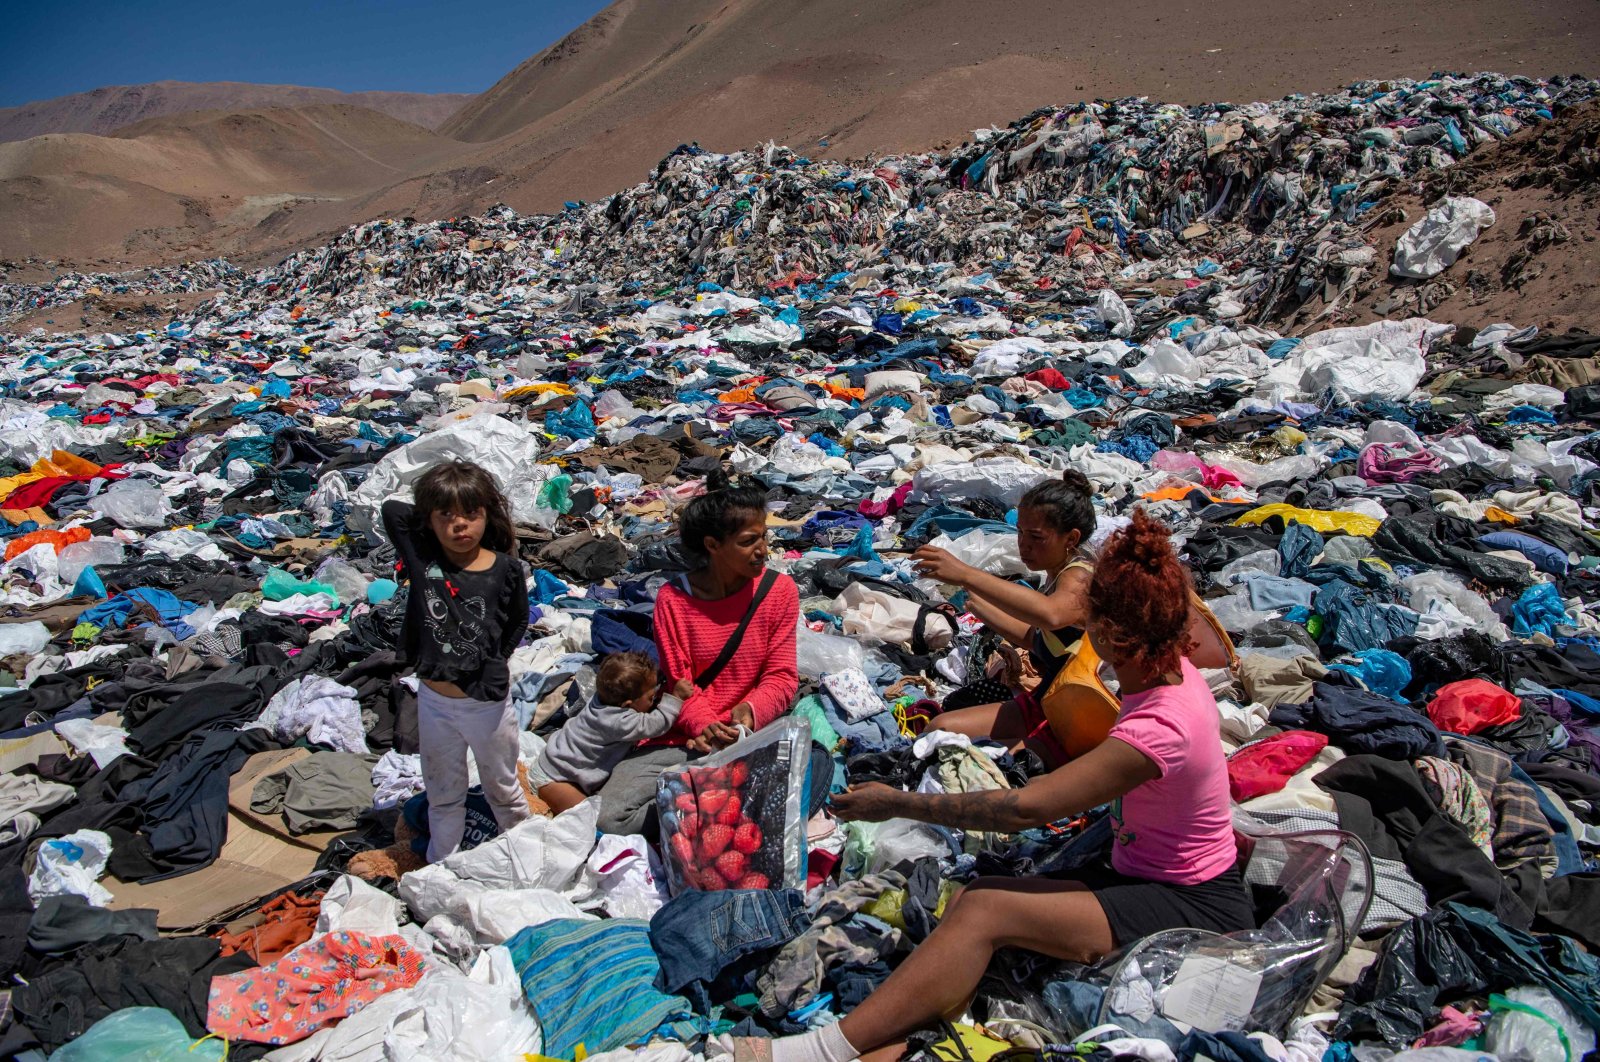 Women from <span style="font-weight: 400;">Alto Hospicio</span> search for salvageable used clothing amid the piles of waste. Credit: Agence France-Presse